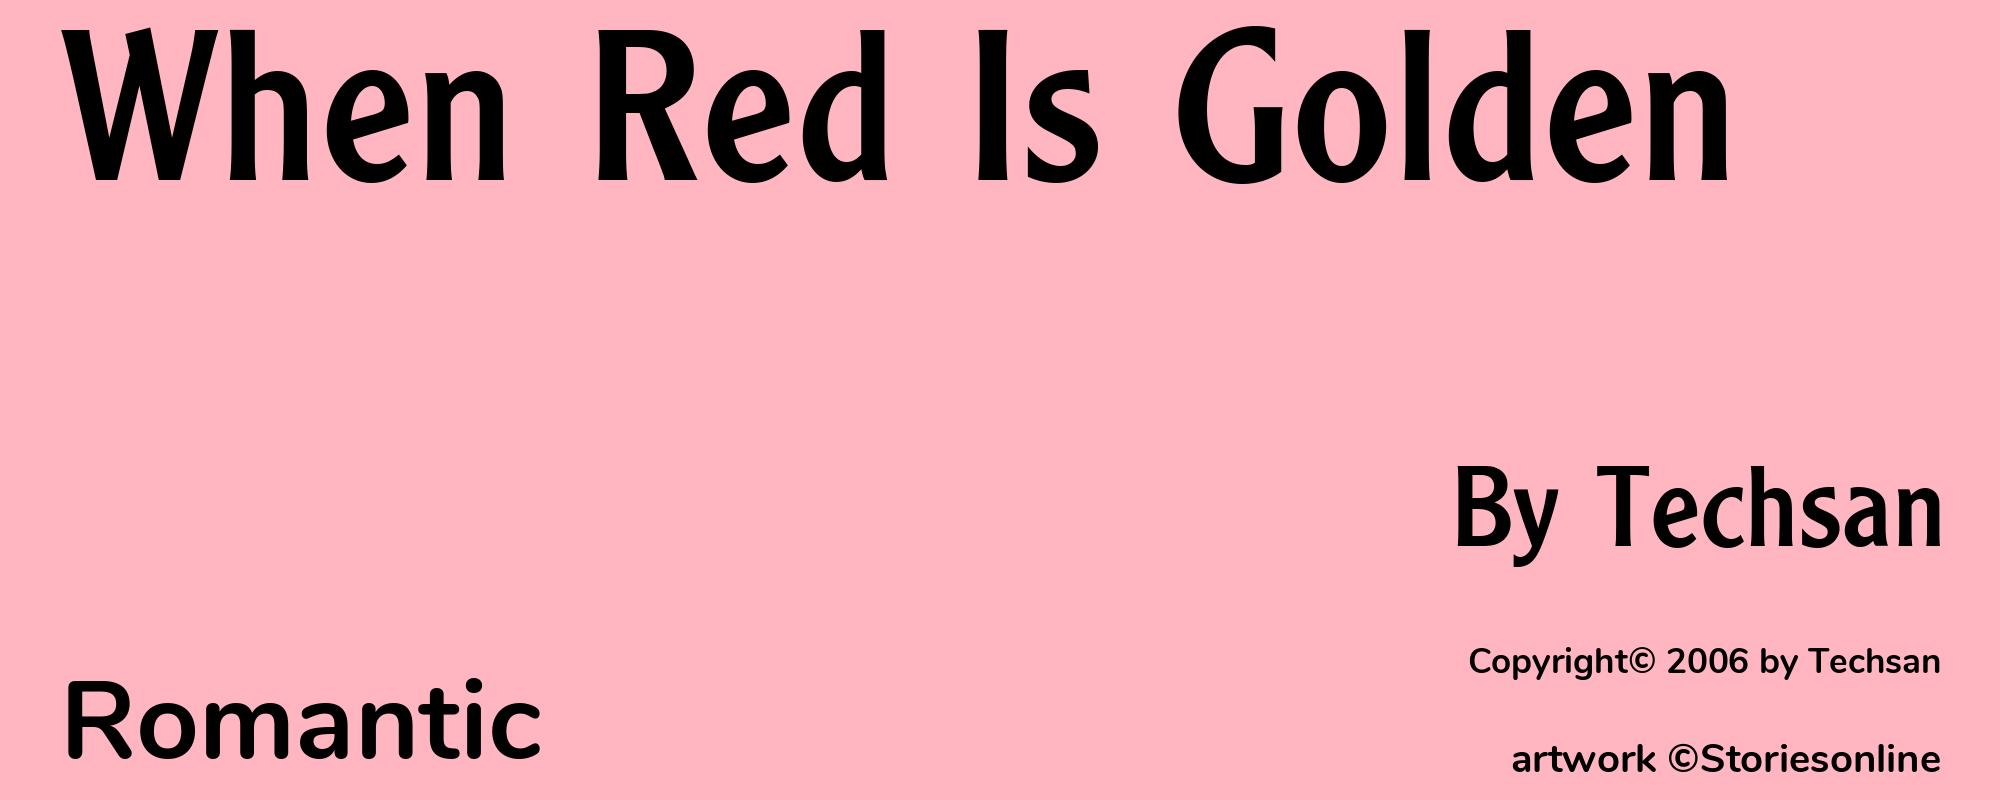 When Red Is Golden - Cover